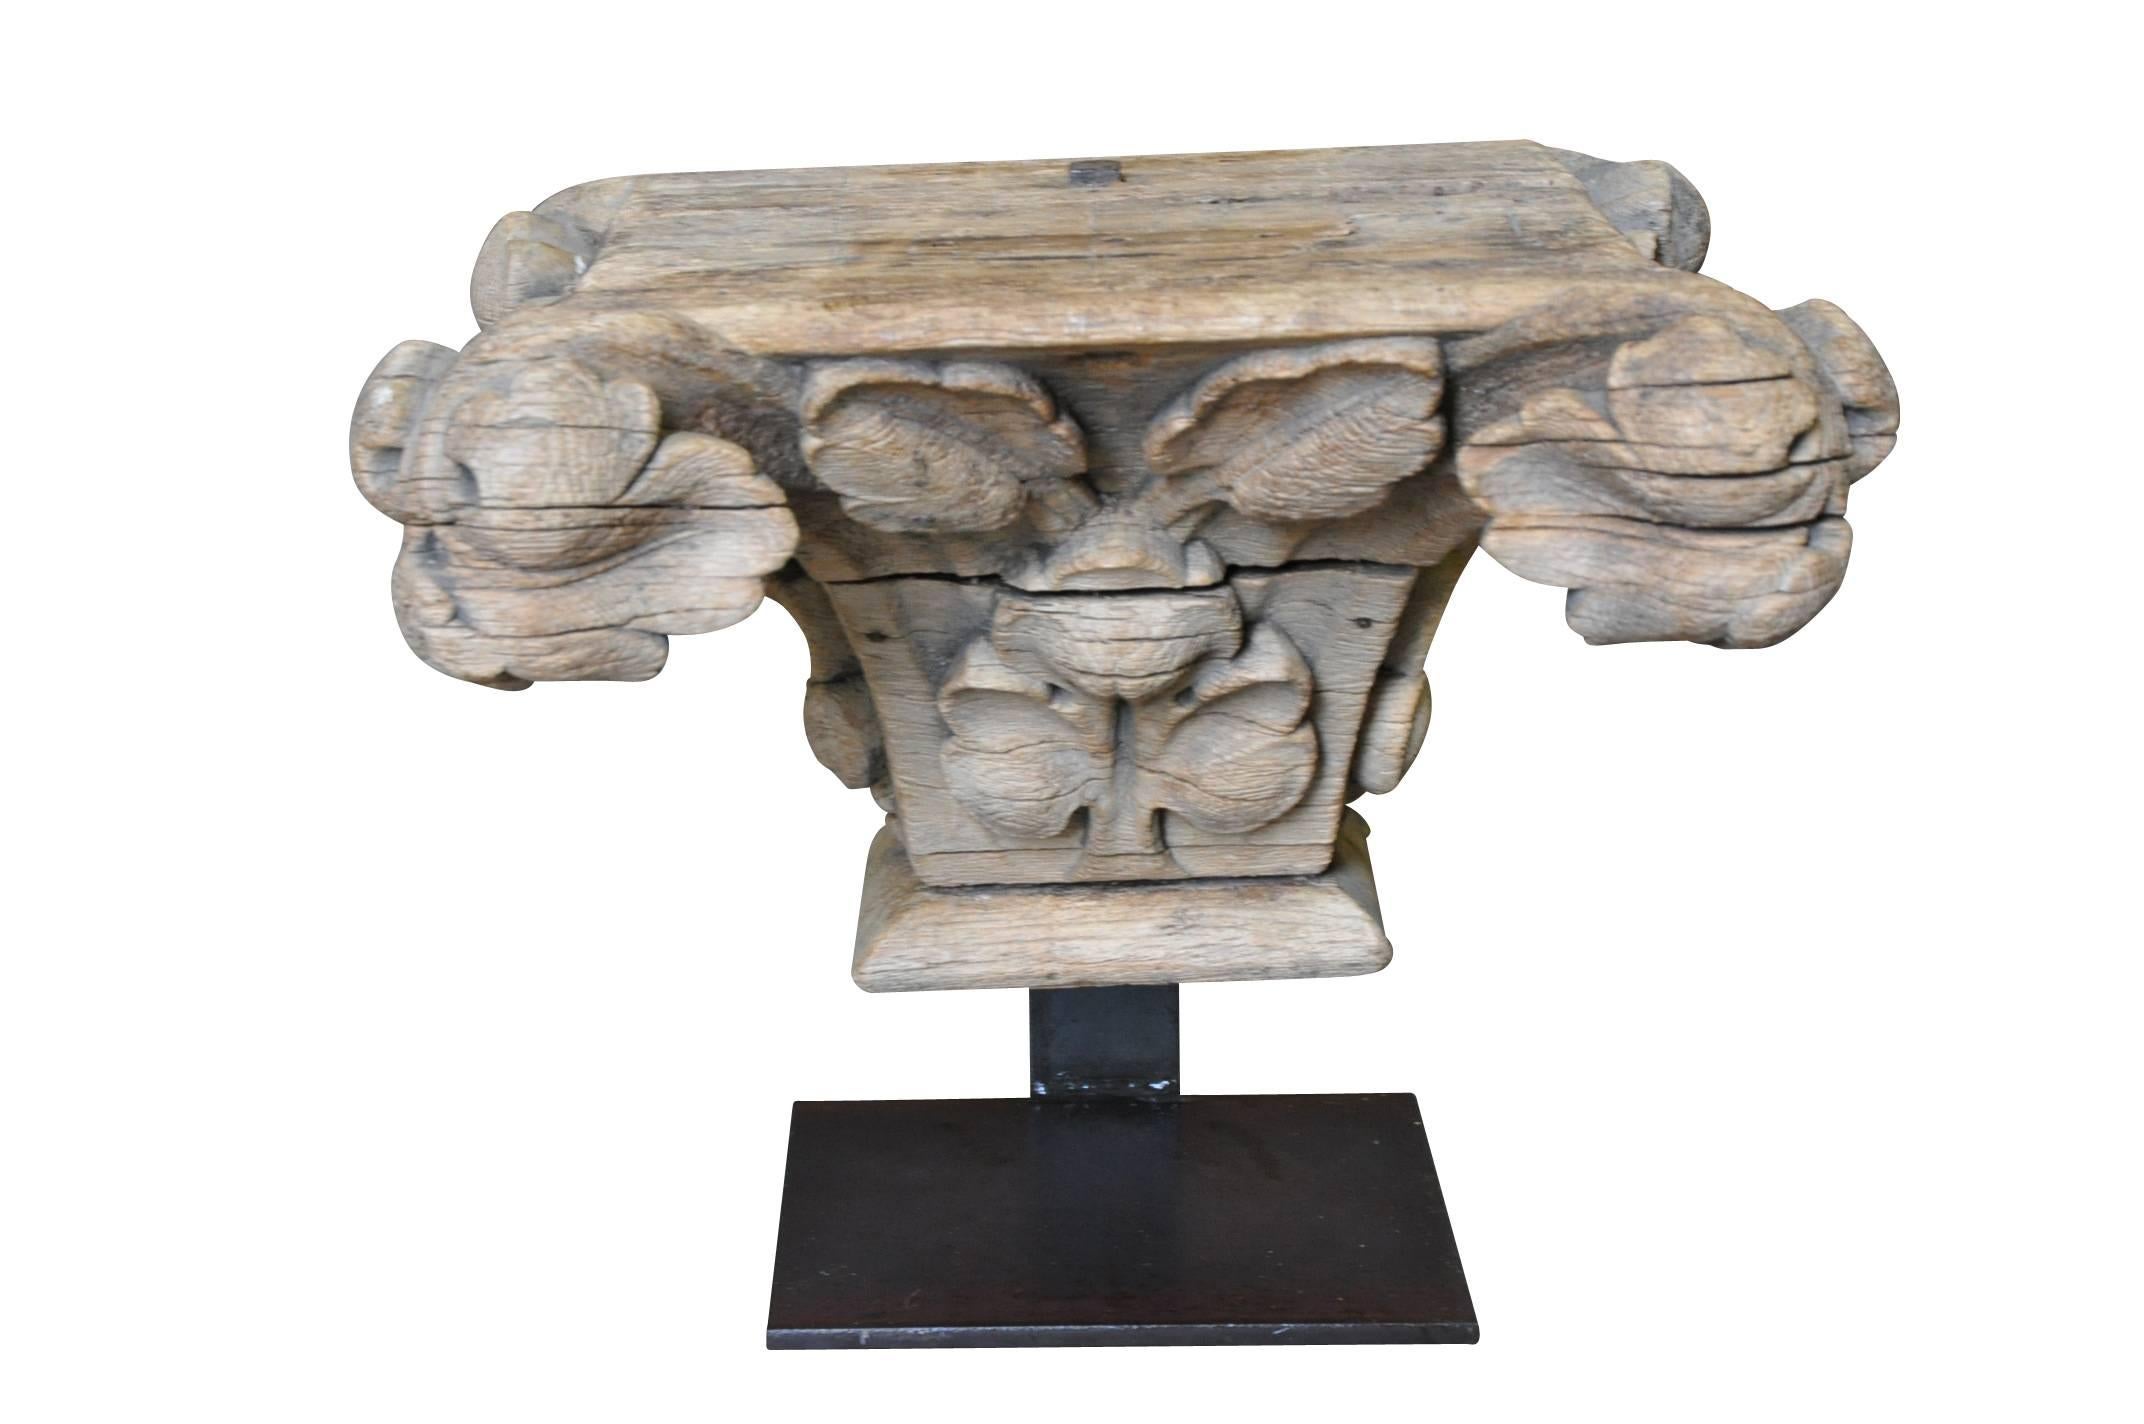 A very lovely 17th century Capital Fragment from the Provence region is France. Beautifully carved from wood with an incredible patina resulting from centuries of being exposed to the elements. The capital fragment is now mounted to a handsome iron